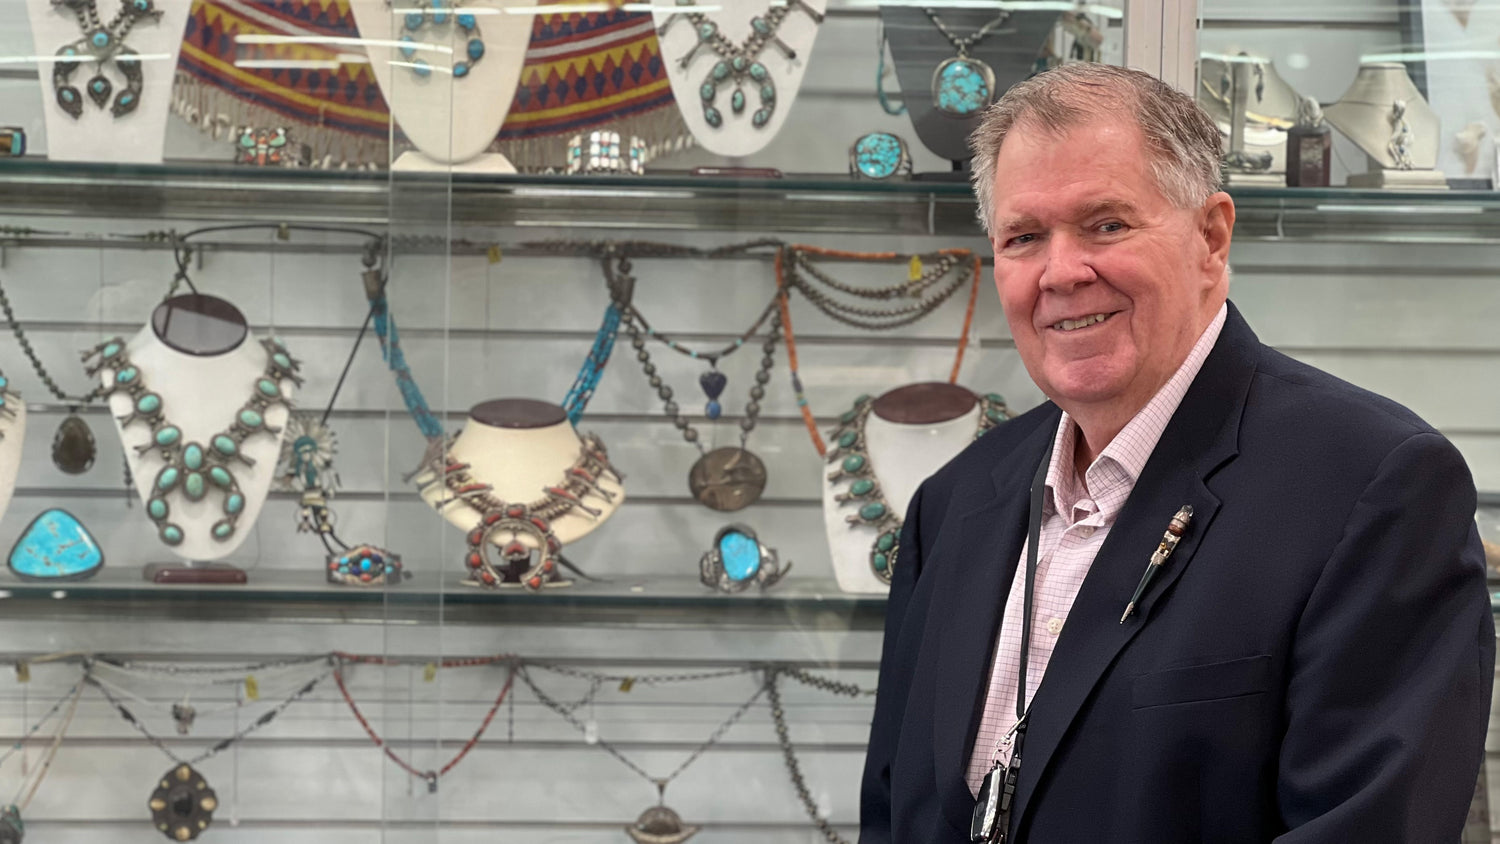 George Goodman, Certified Gemologist, standing in front of Native American squash blossom necklaces at Burton's Gems and Opals.